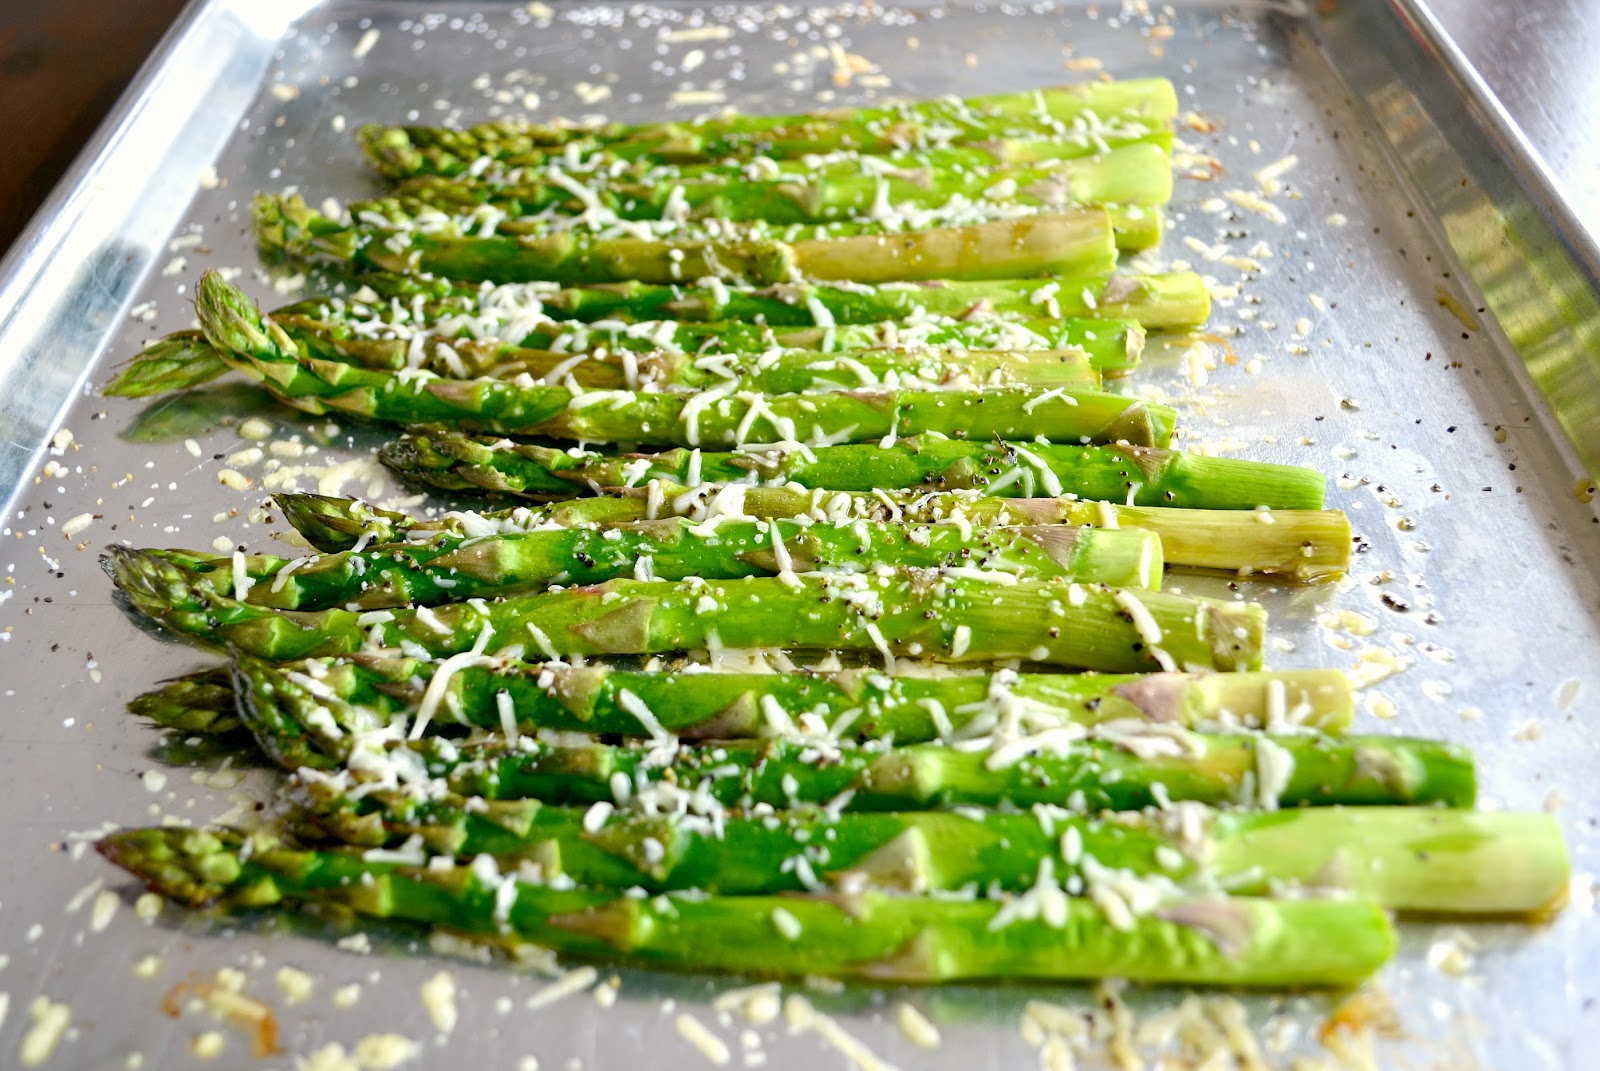 Real Men Cook Dinner: Roasted Asparagus with Parmigiano Reggiano